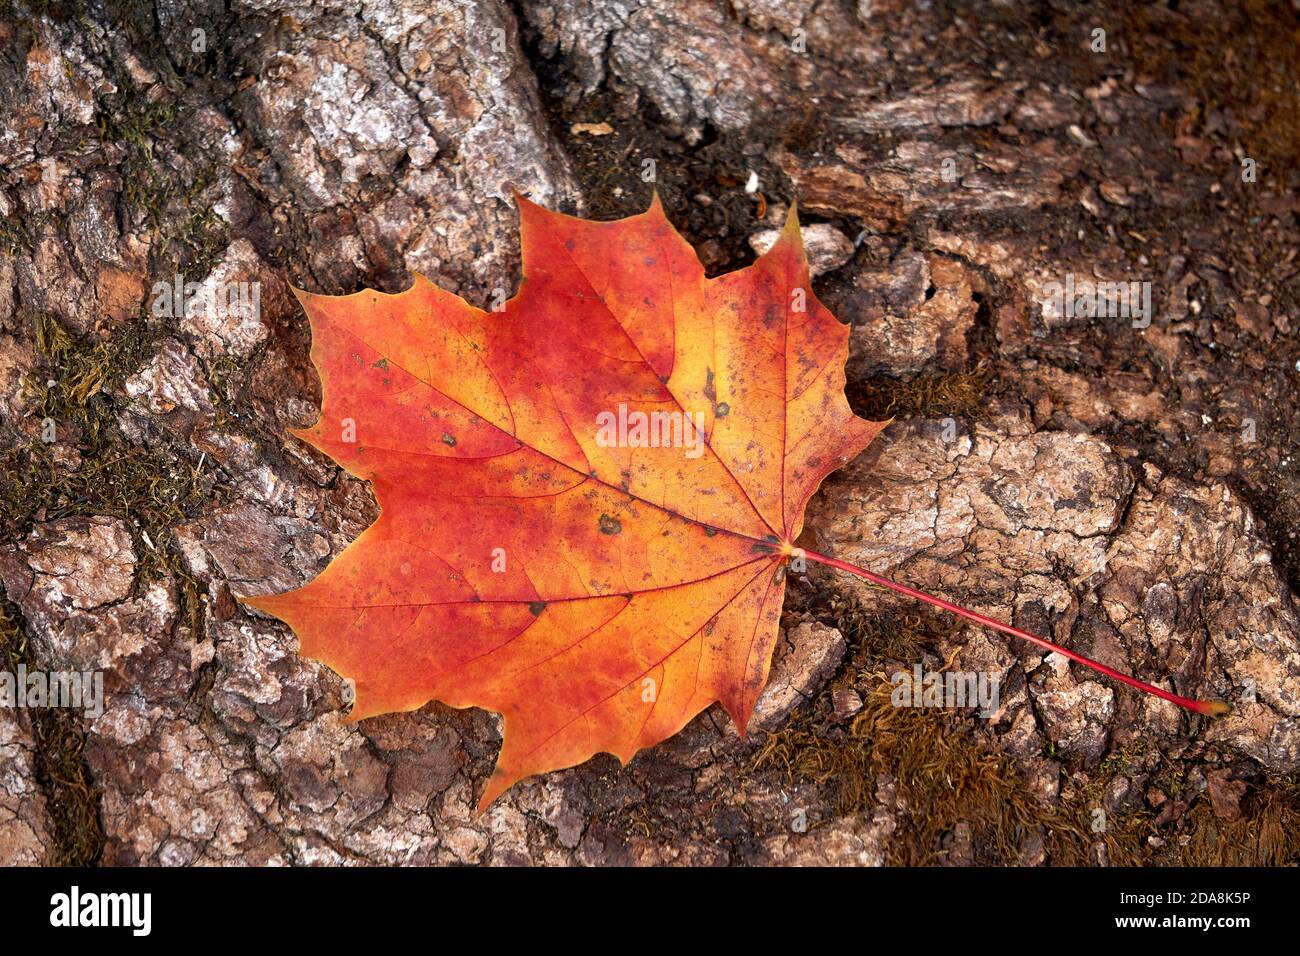 Closeup of a single red and yellow Sugar Maple tree leaf and bark in the fall,  Vancouver, British Columbia, Canada Stock Photo